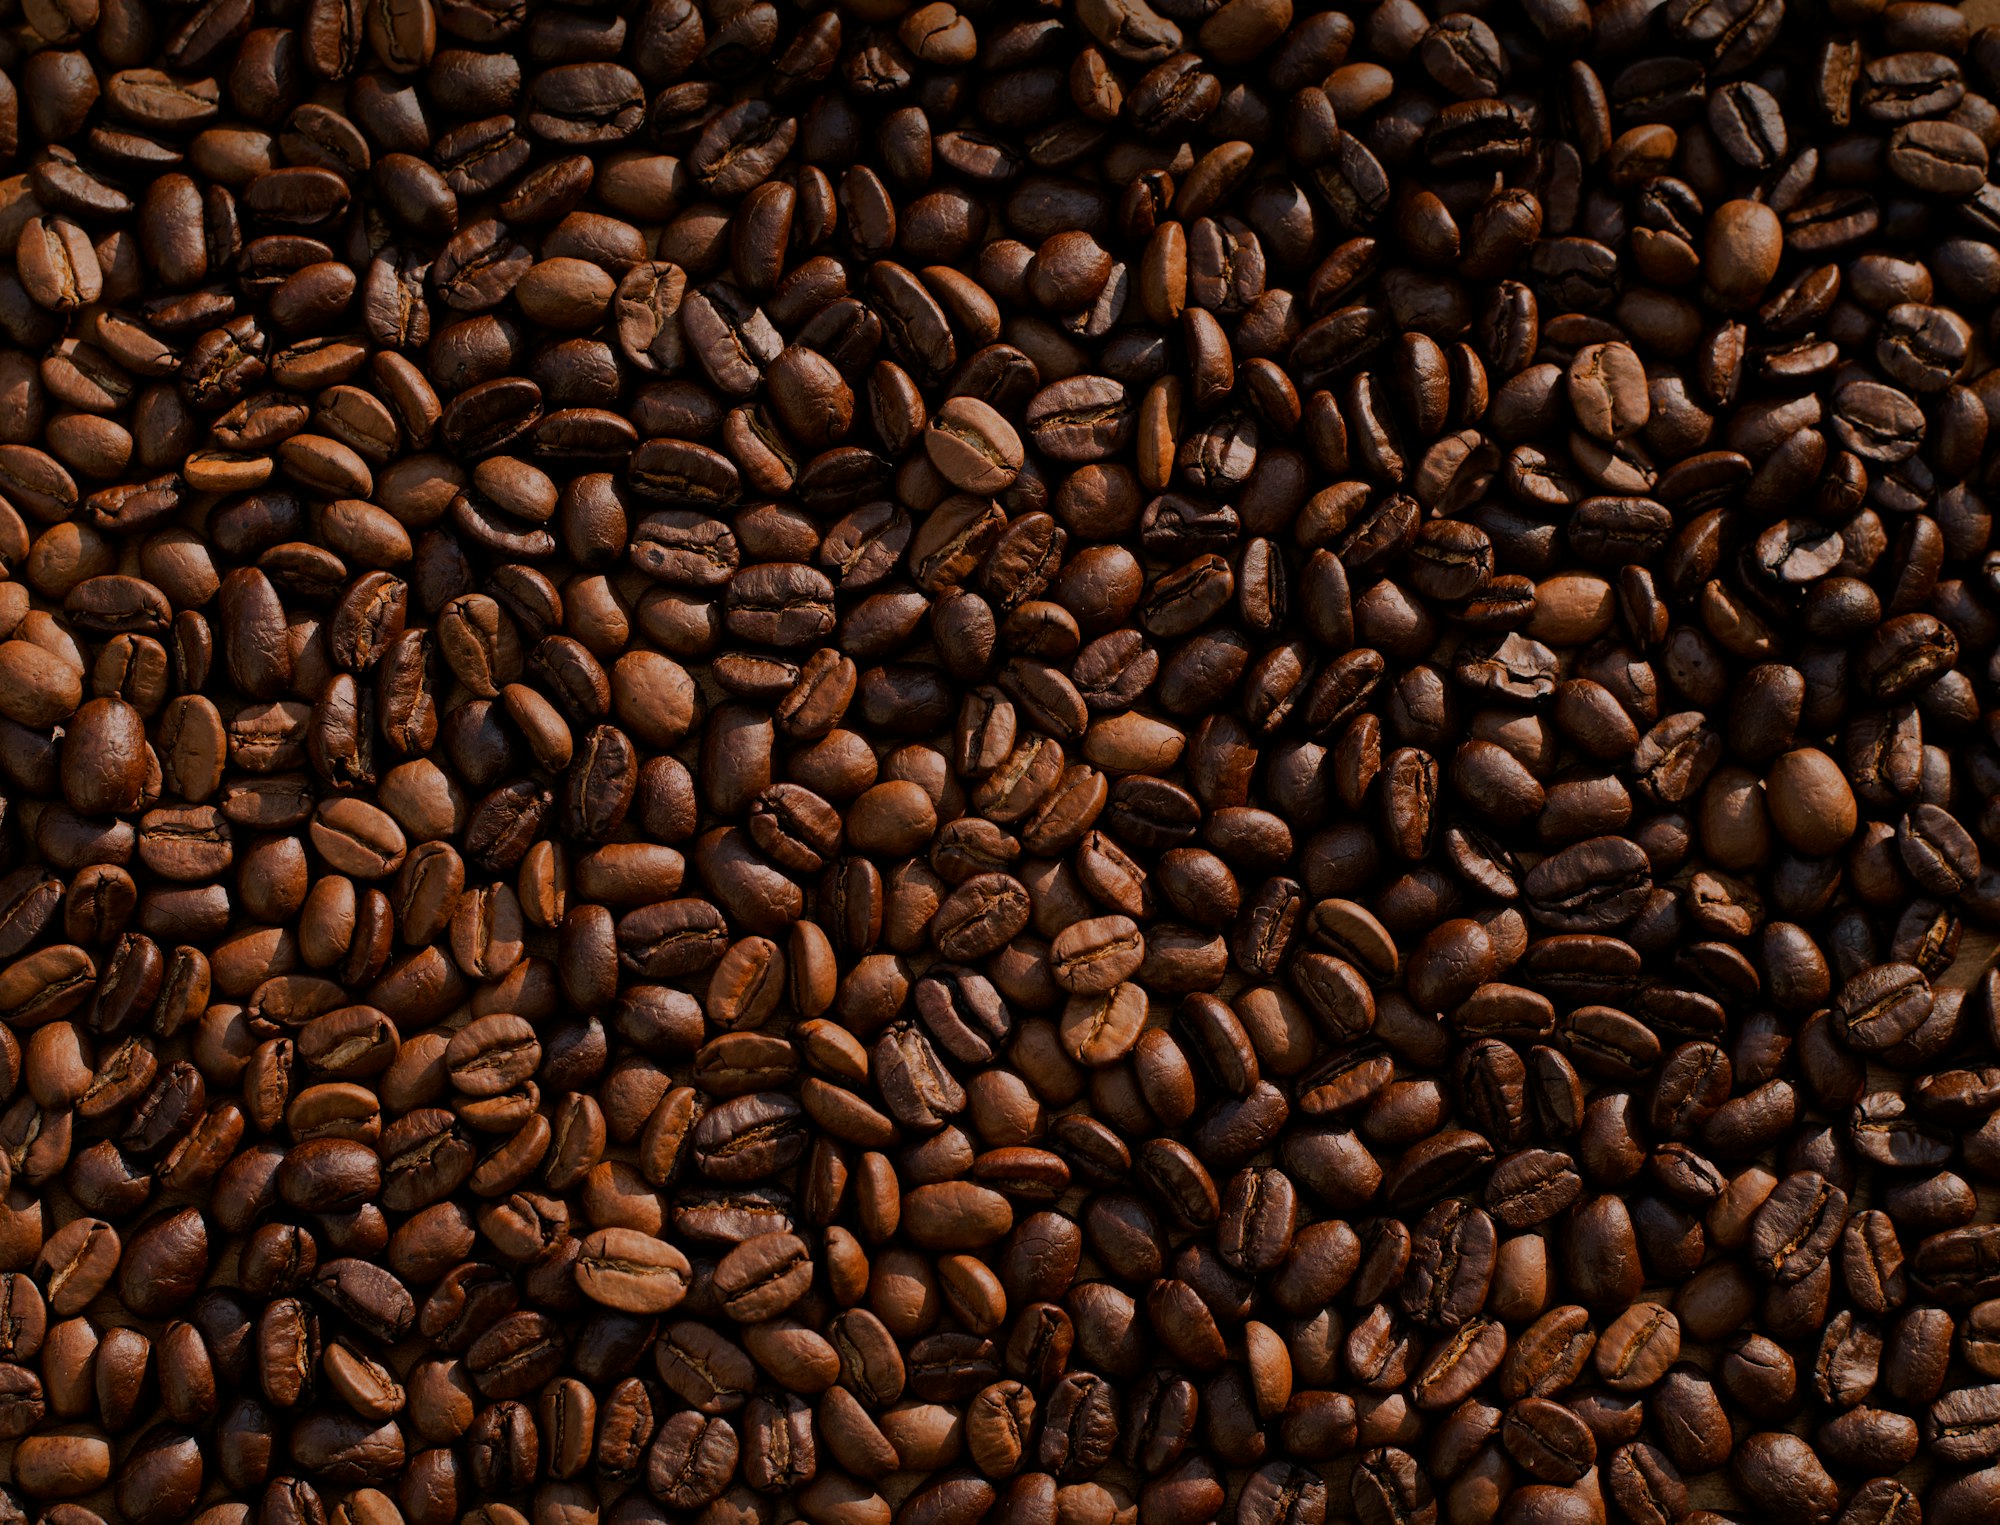 Which State Grows Their Own Coffee Beans?